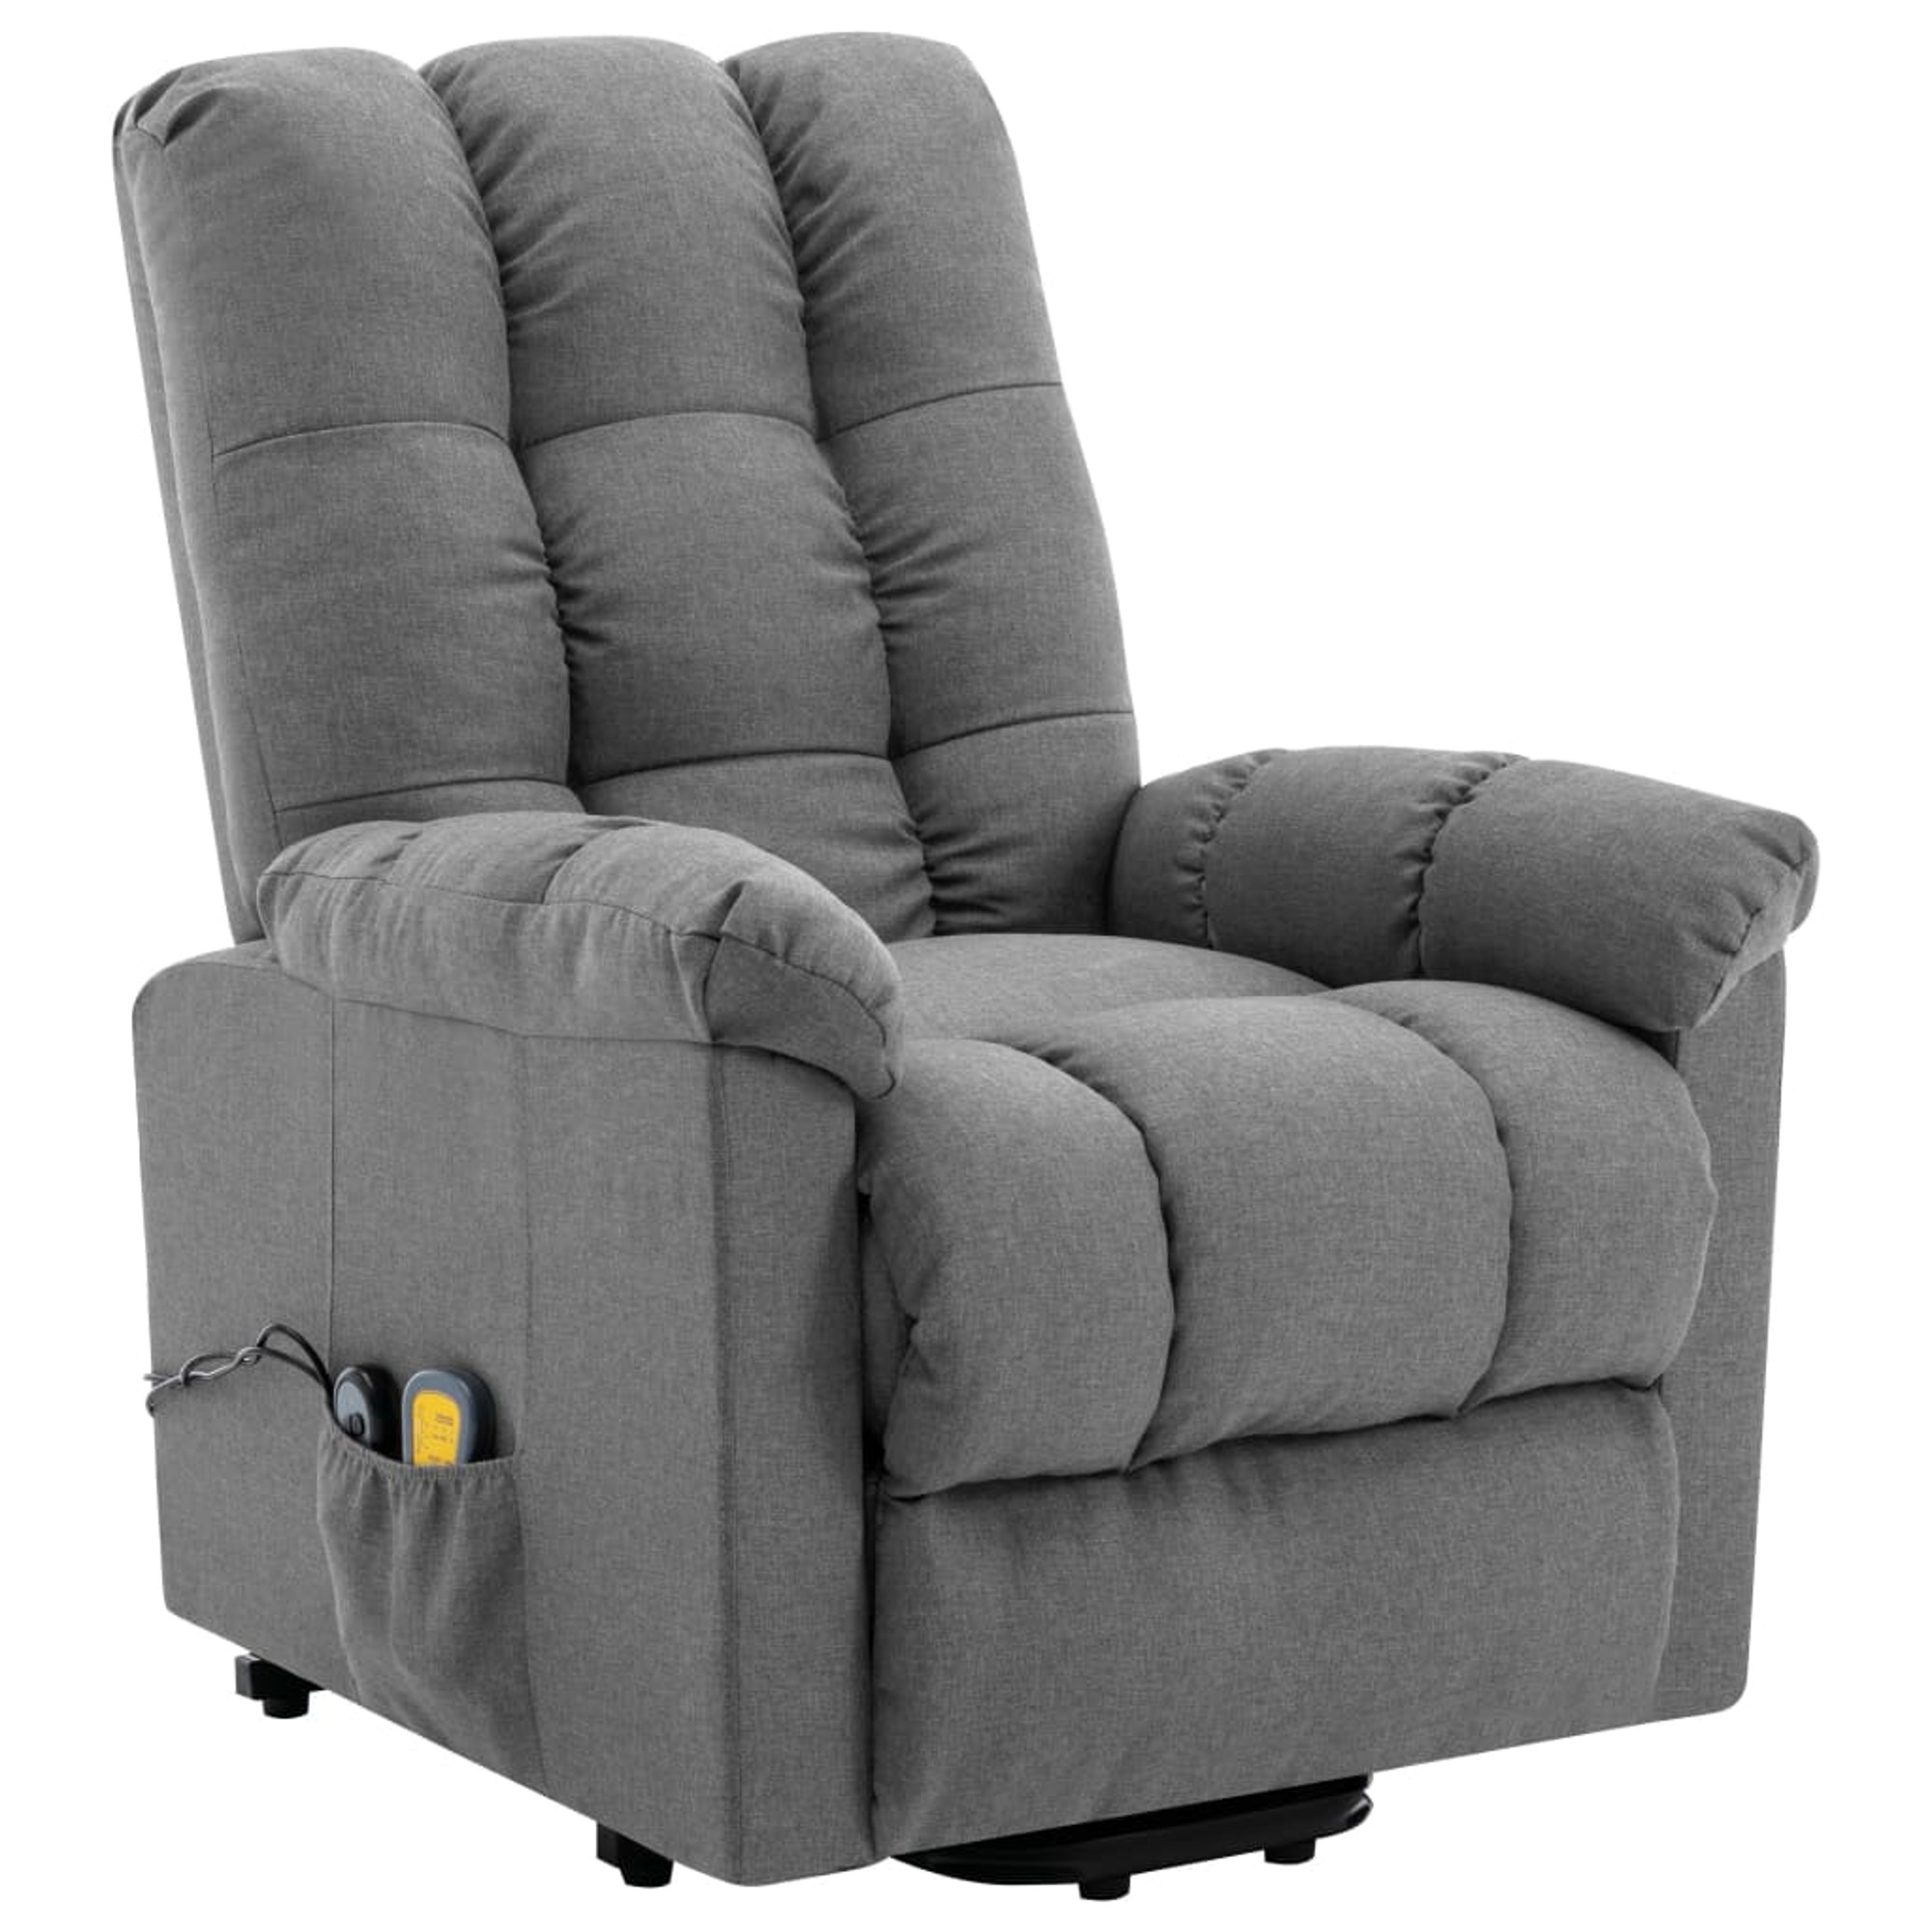 vidaXL Power Lift Recliner Electric Lift Chair for Home Theater Cinema Fabric